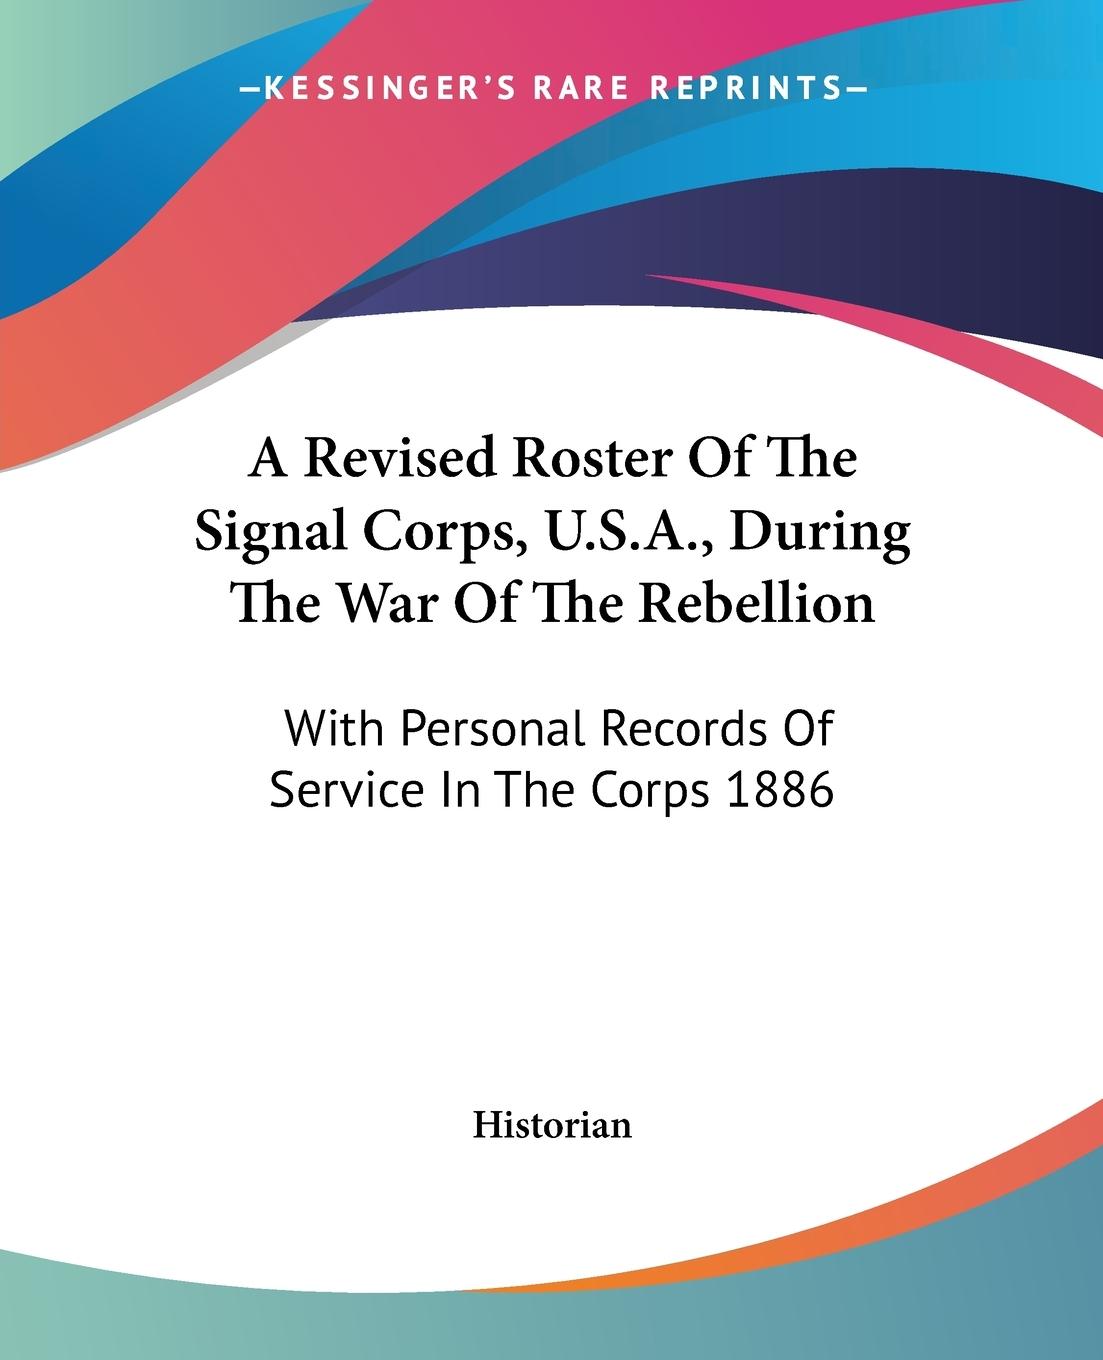 A Revised Roster Of The Signal Corps, U.S.A., During The War Of The Rebellion - Historian